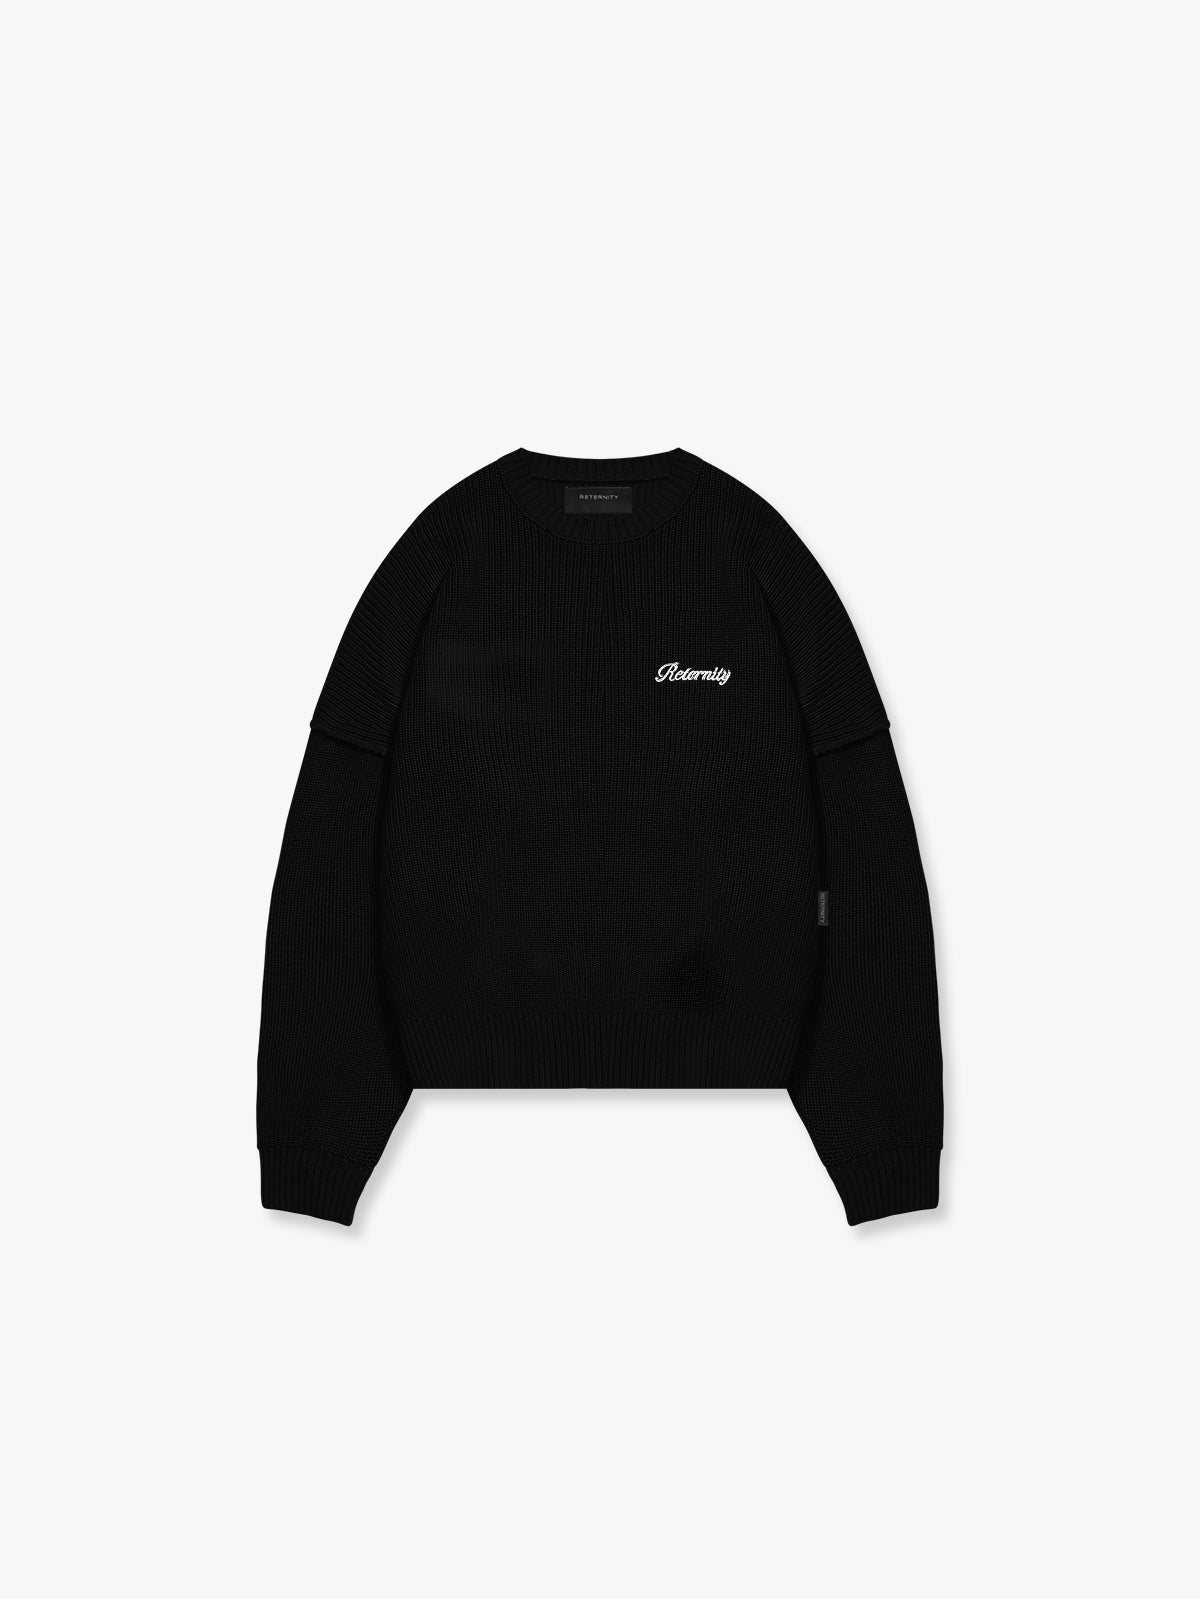 KNIT SWEATER THE TROPHY SERIES - BLACK